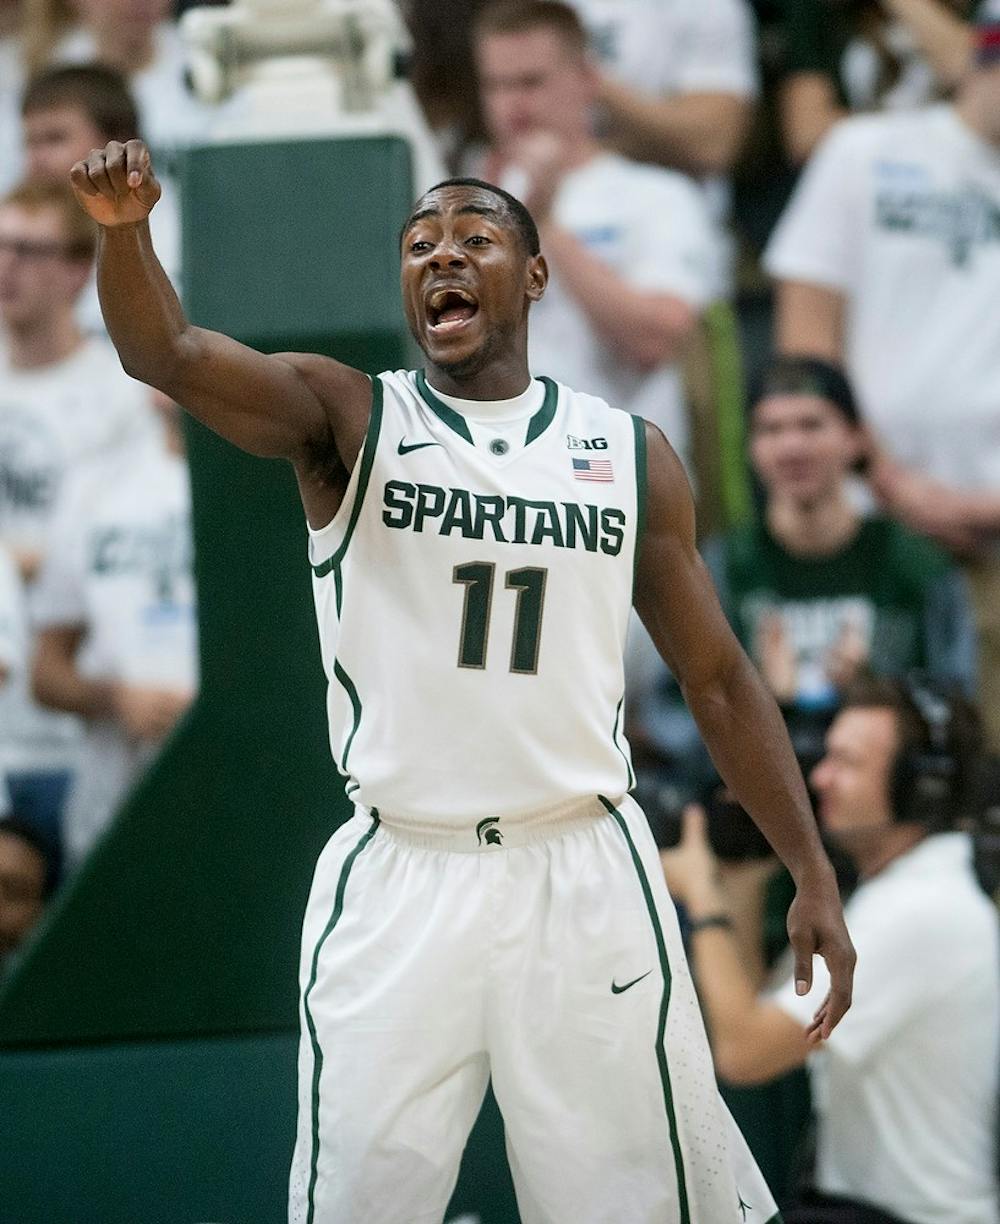 <p>Freshman guard Lourawls Nairn Jr.,11, calls out to a teammate during the game against The Masters College on Nov. 3, 2014, at the Breslin Center. The Spartans defeated the Mustangs 97-56. Raymond Williams/The State News</p>